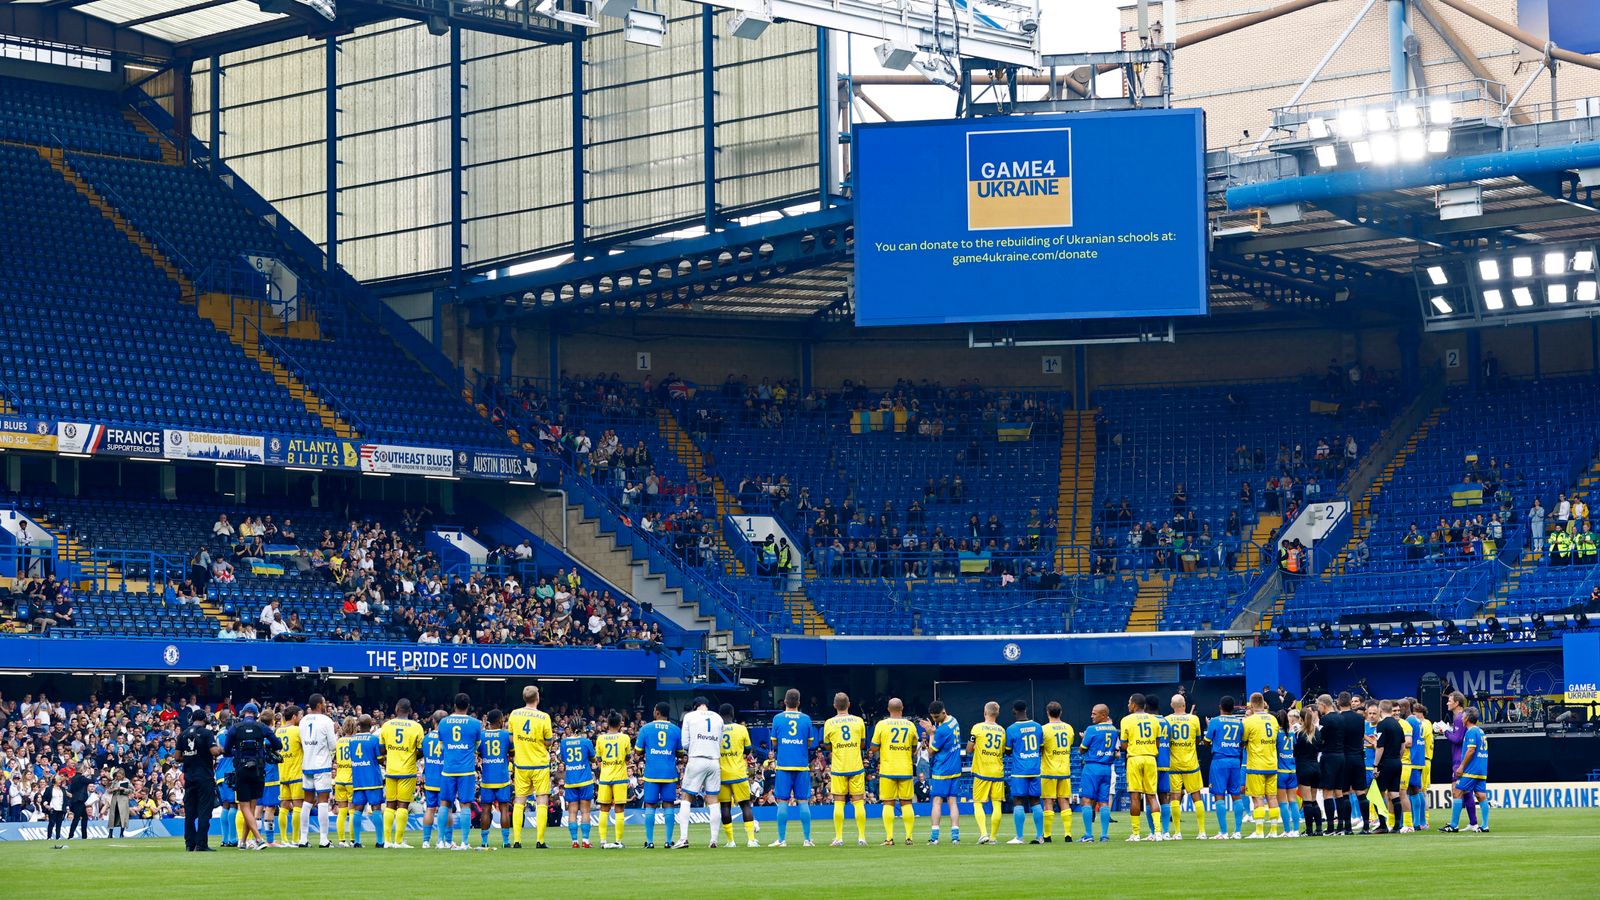 The teams lined up before their charity match, Game4Ukraine